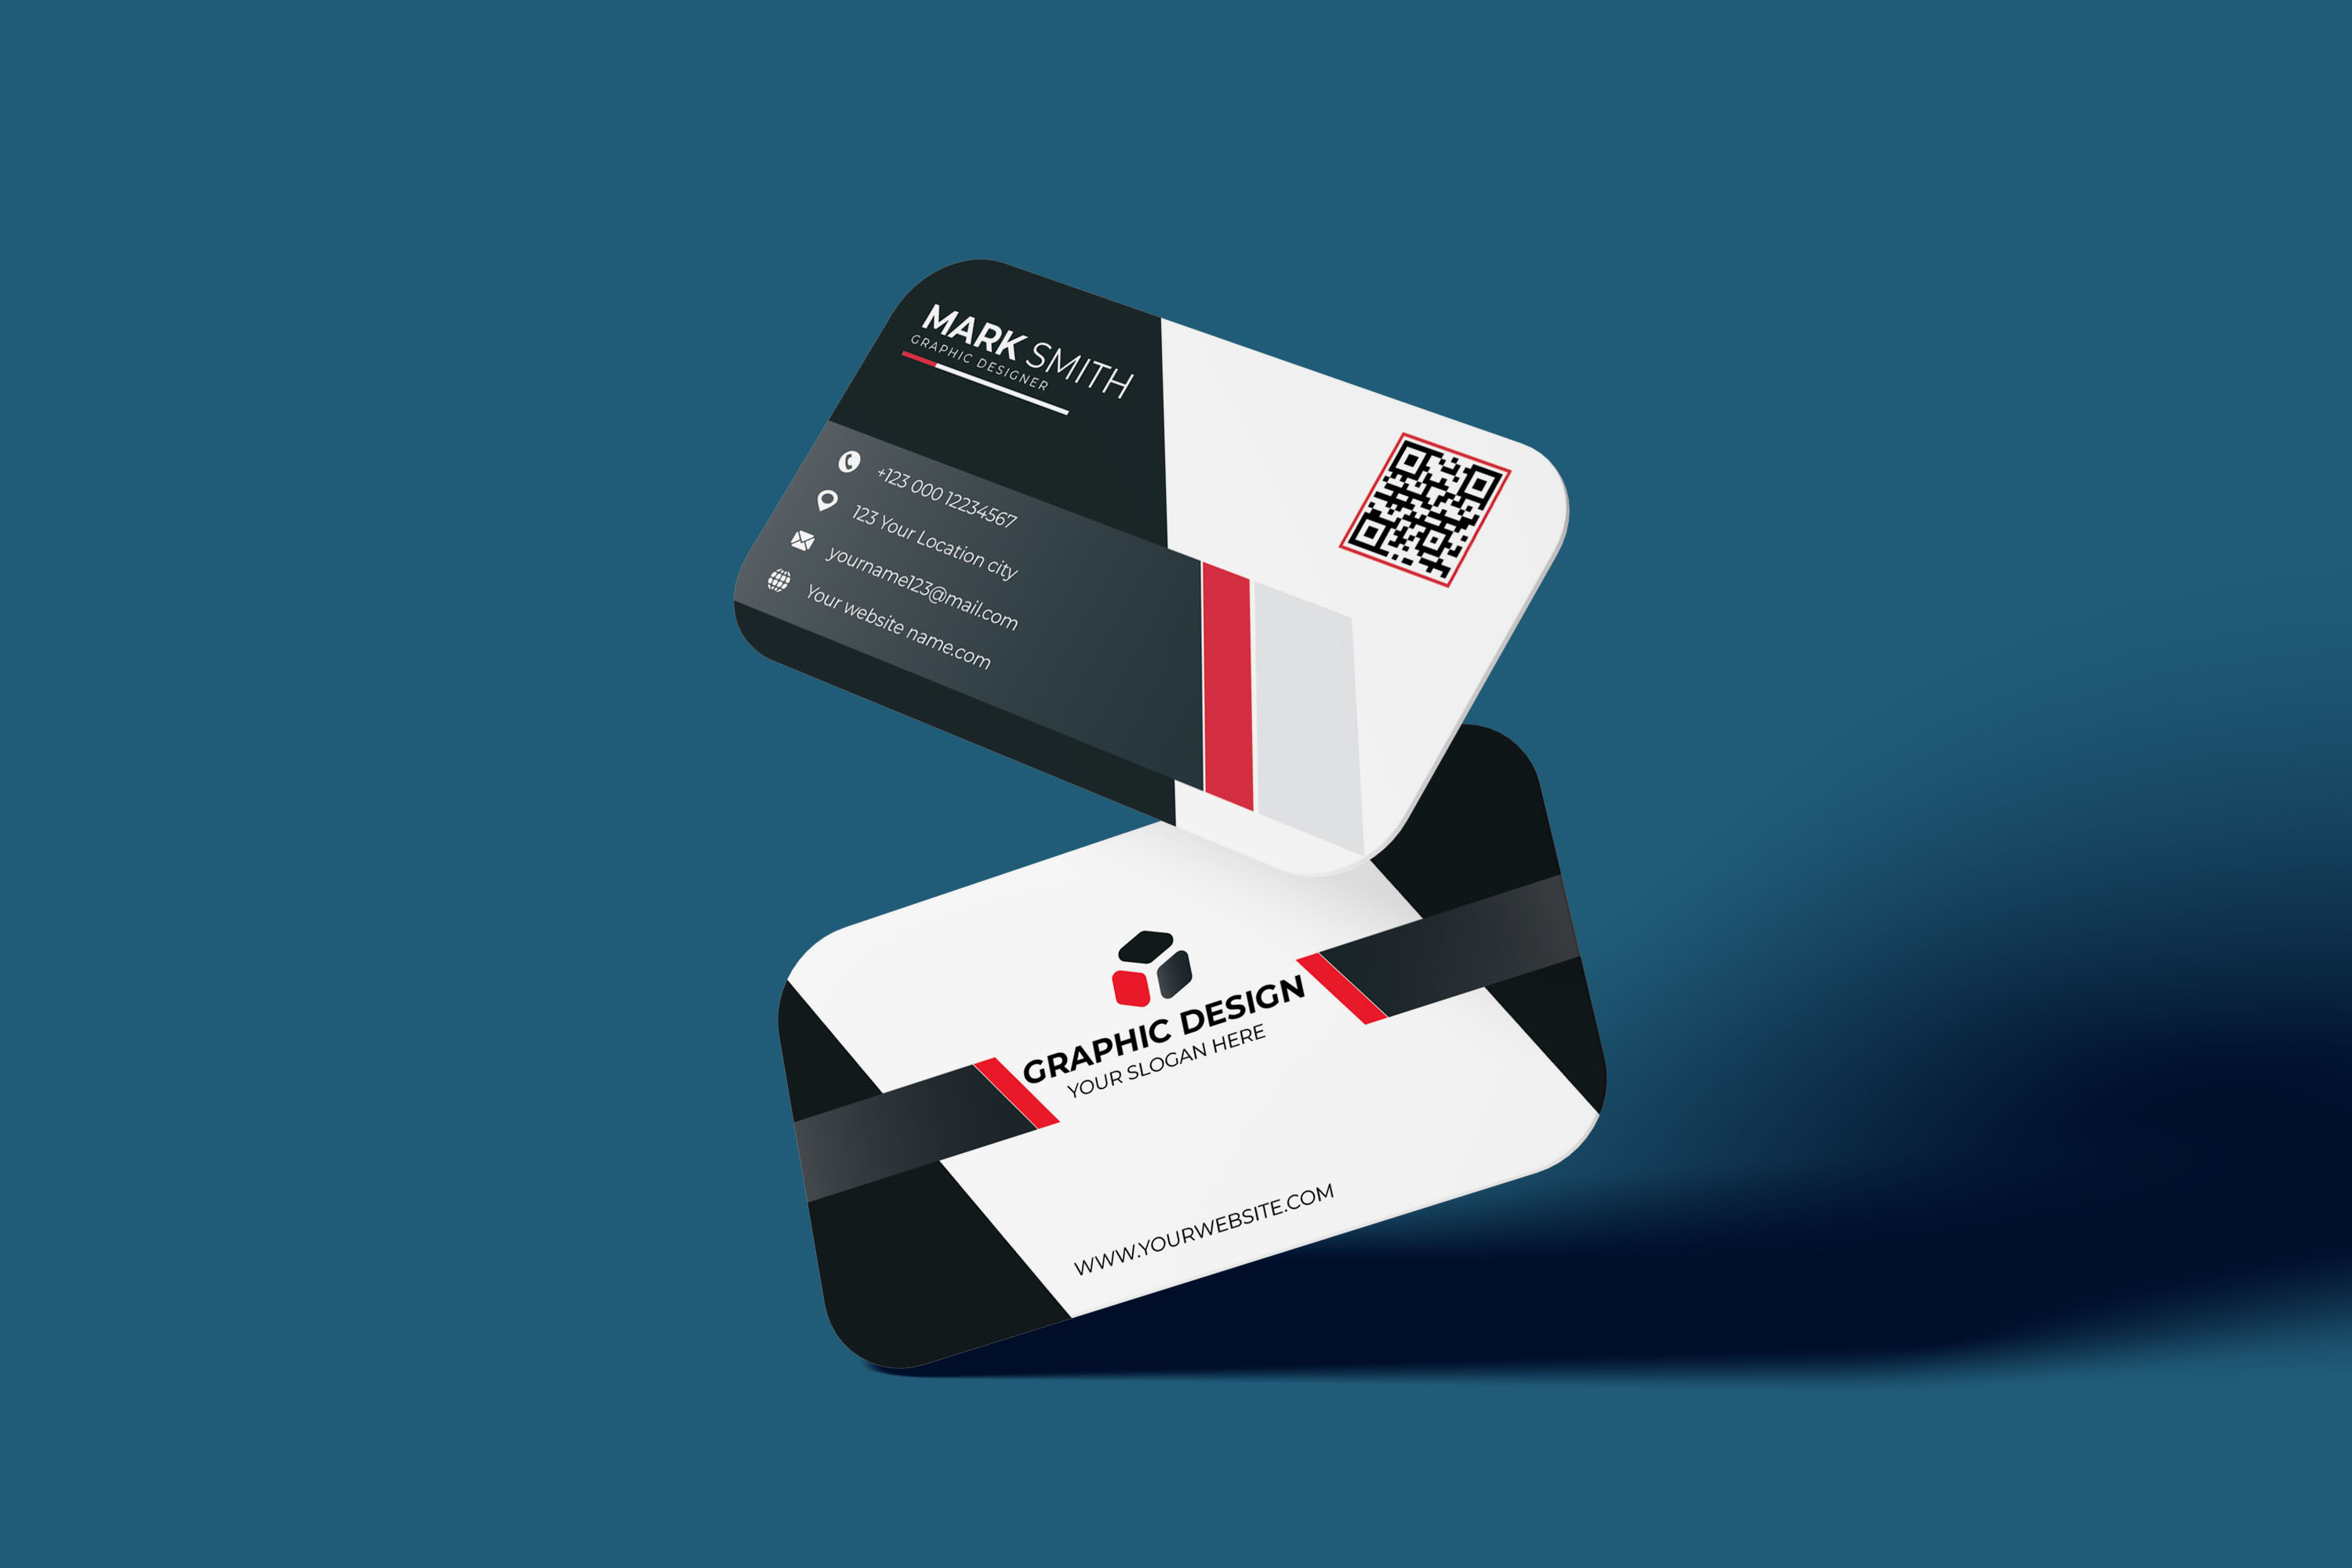 Image with double sided irresistible business card template in black and white.